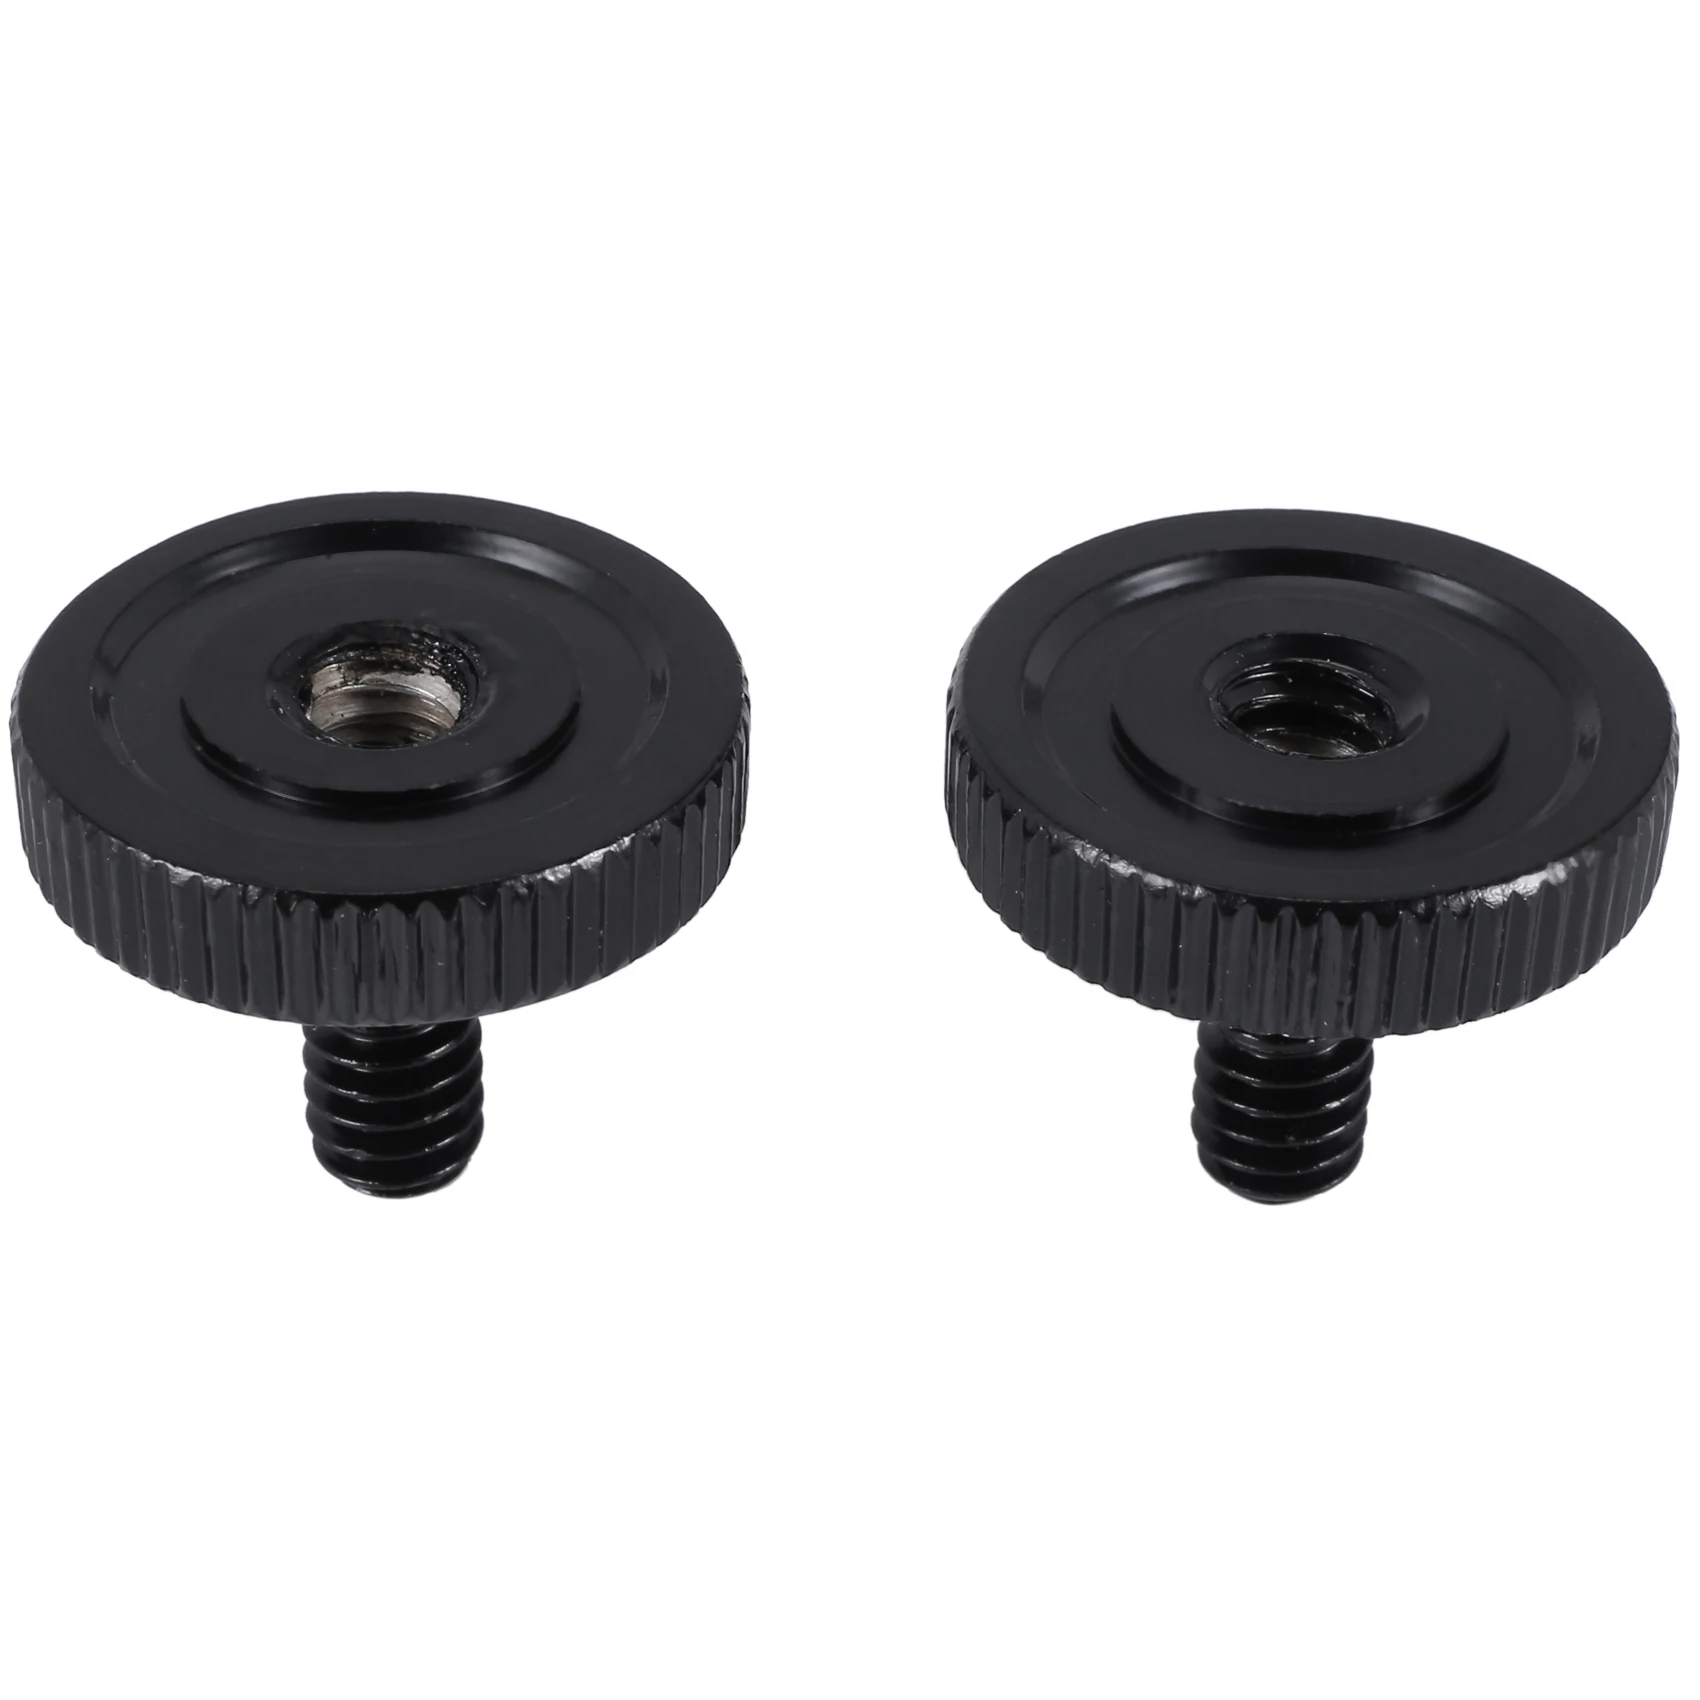 

Thumb Screw Camera Quick Release 1/4 inch Thumbscrew L Bracket Screw Mount Adapter Bottom 1/4 inch-20 Female Thread (Pack of 2)